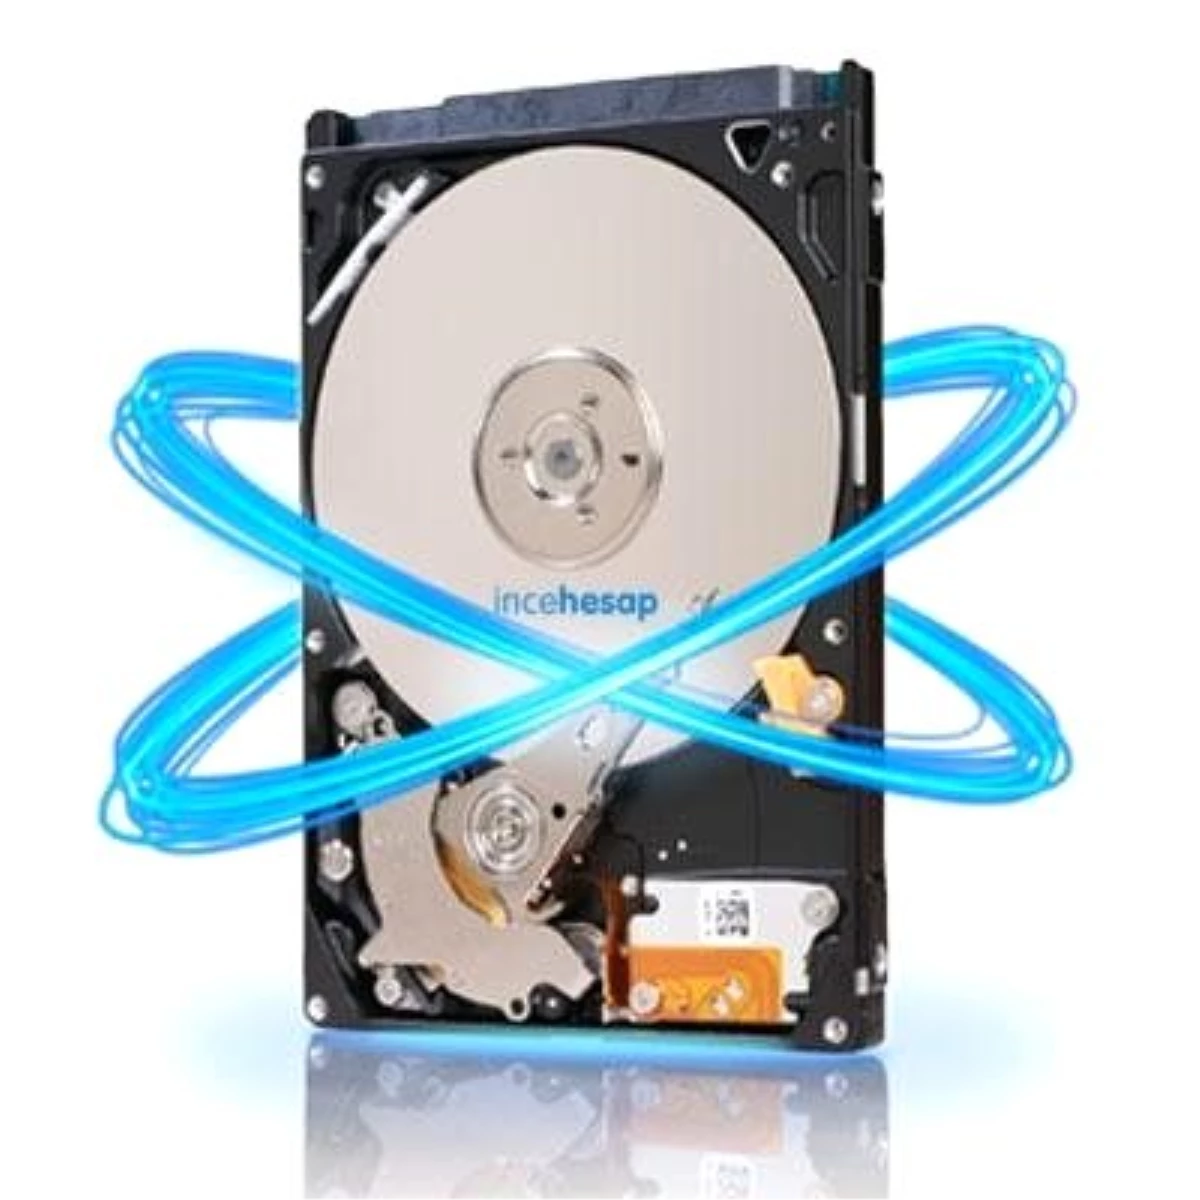 Seagate 500 Gb St9500423as 2.5" Harddisk